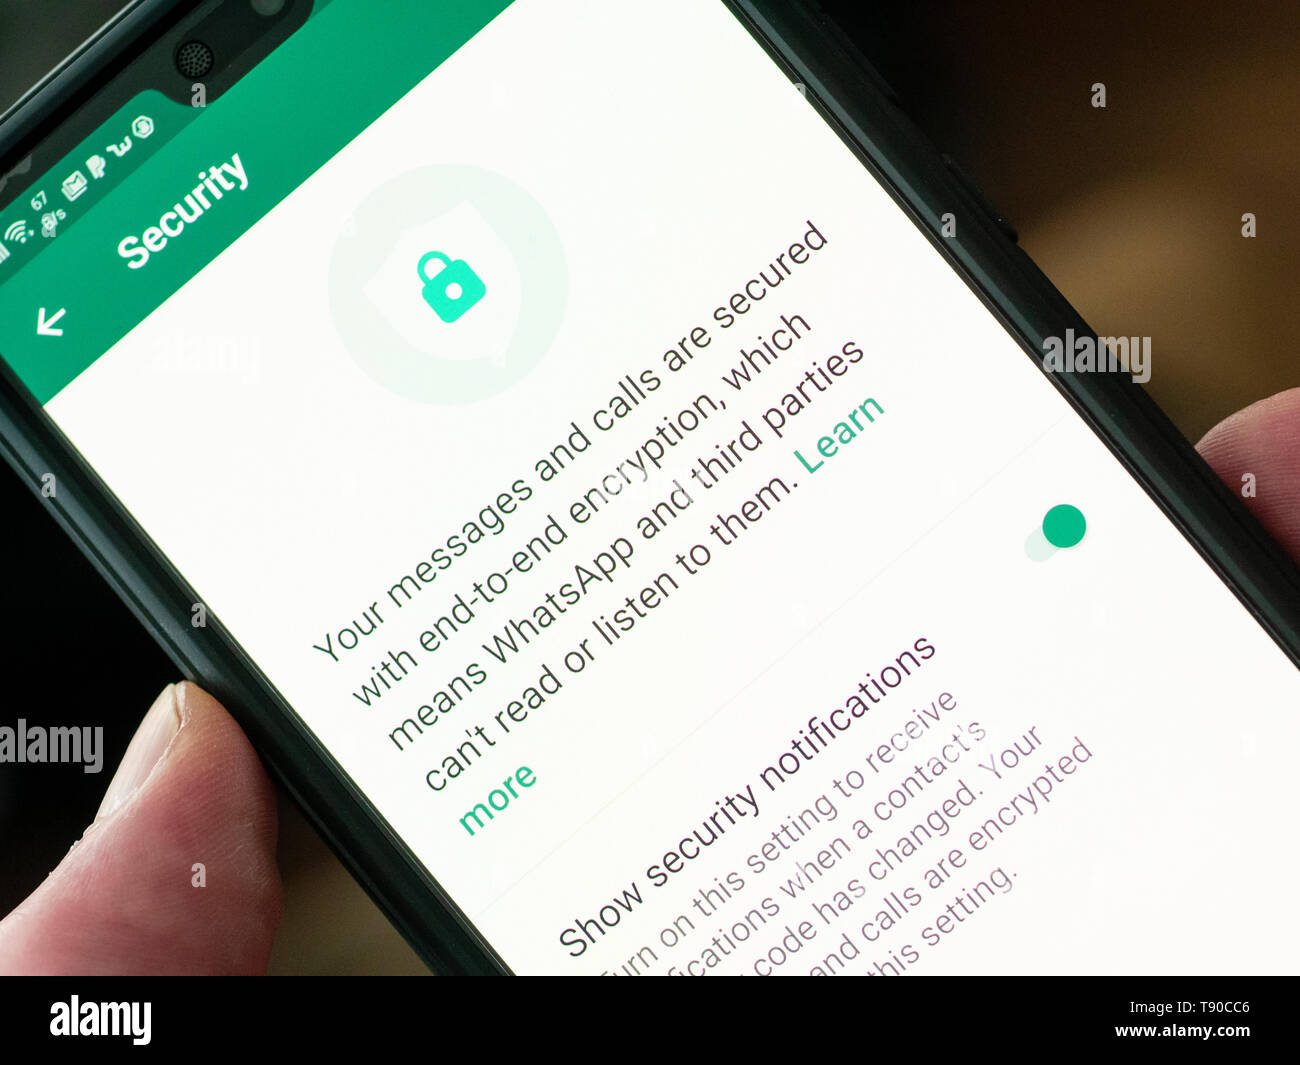 WhatsApp Messenger on a Smartphone, WhatsApp allows users to encrypt their calls and messages for privacy. It is owned by Facebook and founded in 2009 Stock Photo